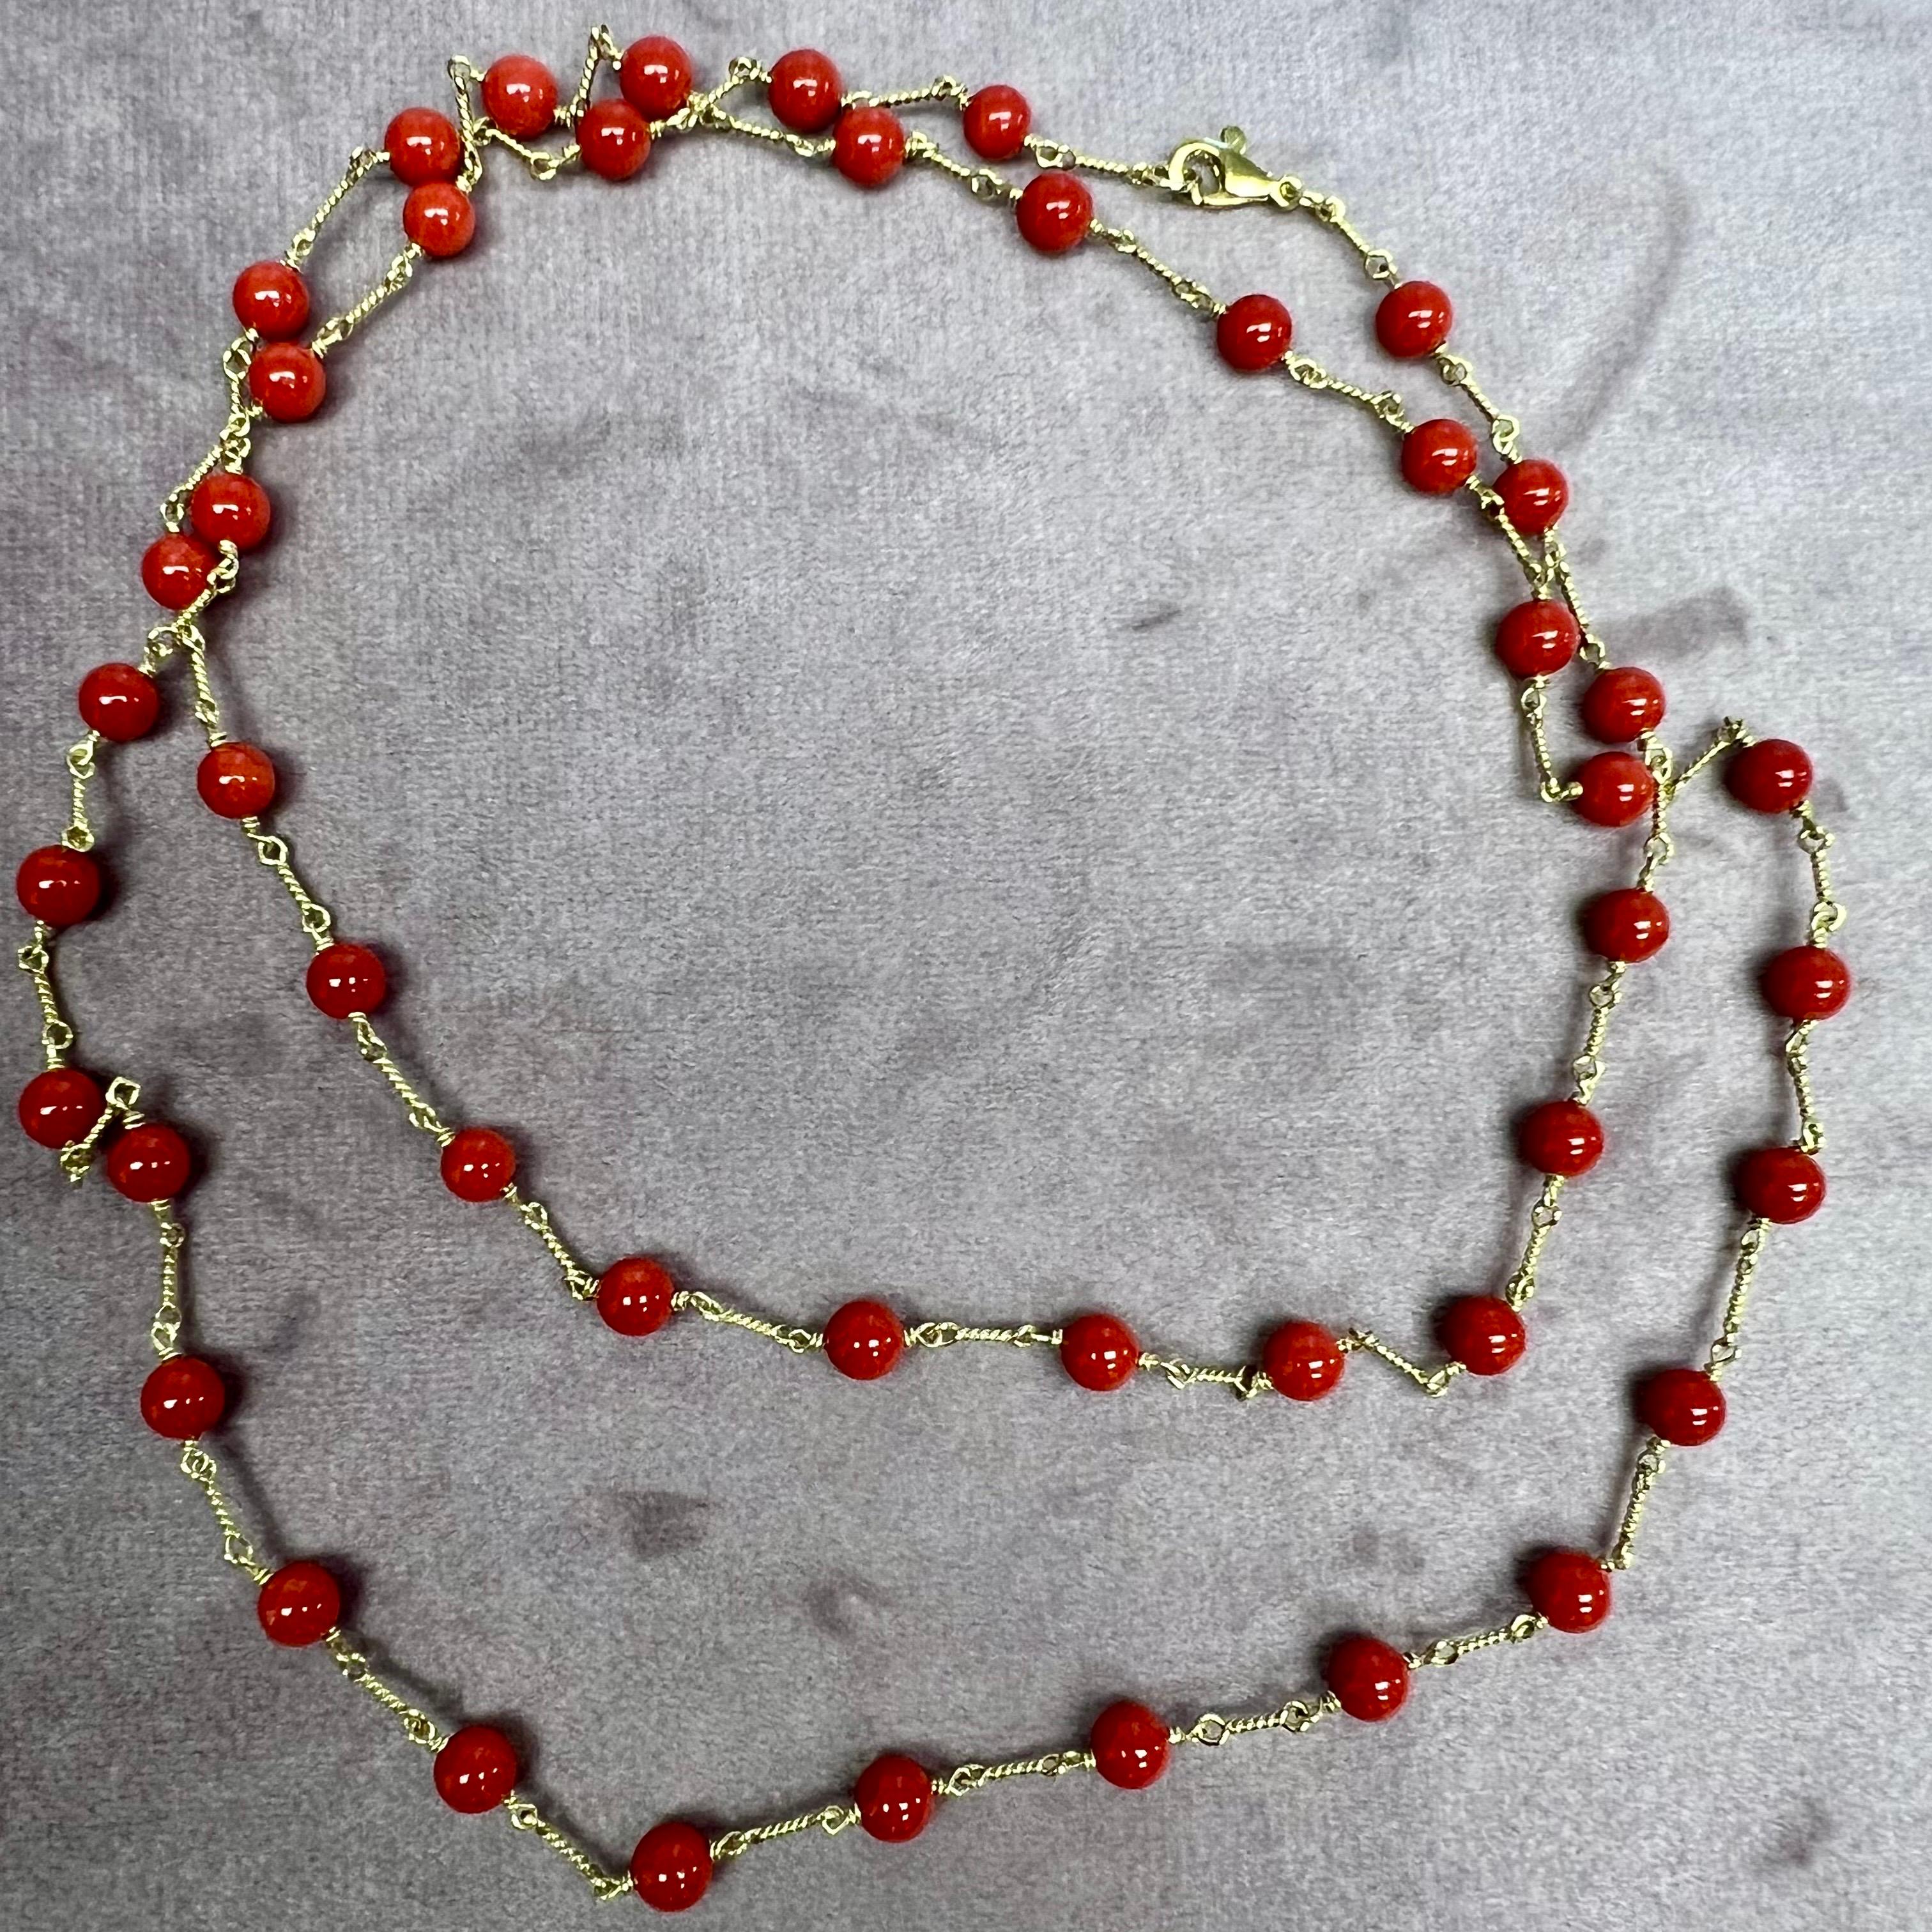 Created in 18 karat yellow gold
32 inch length
Oxblood red orange coral large beads
18kyg lobster clasp
Limited edition


About the Designers

Drawing inspiration from little things, Dharmesh & Namrata Kothari have created an extraordinary and